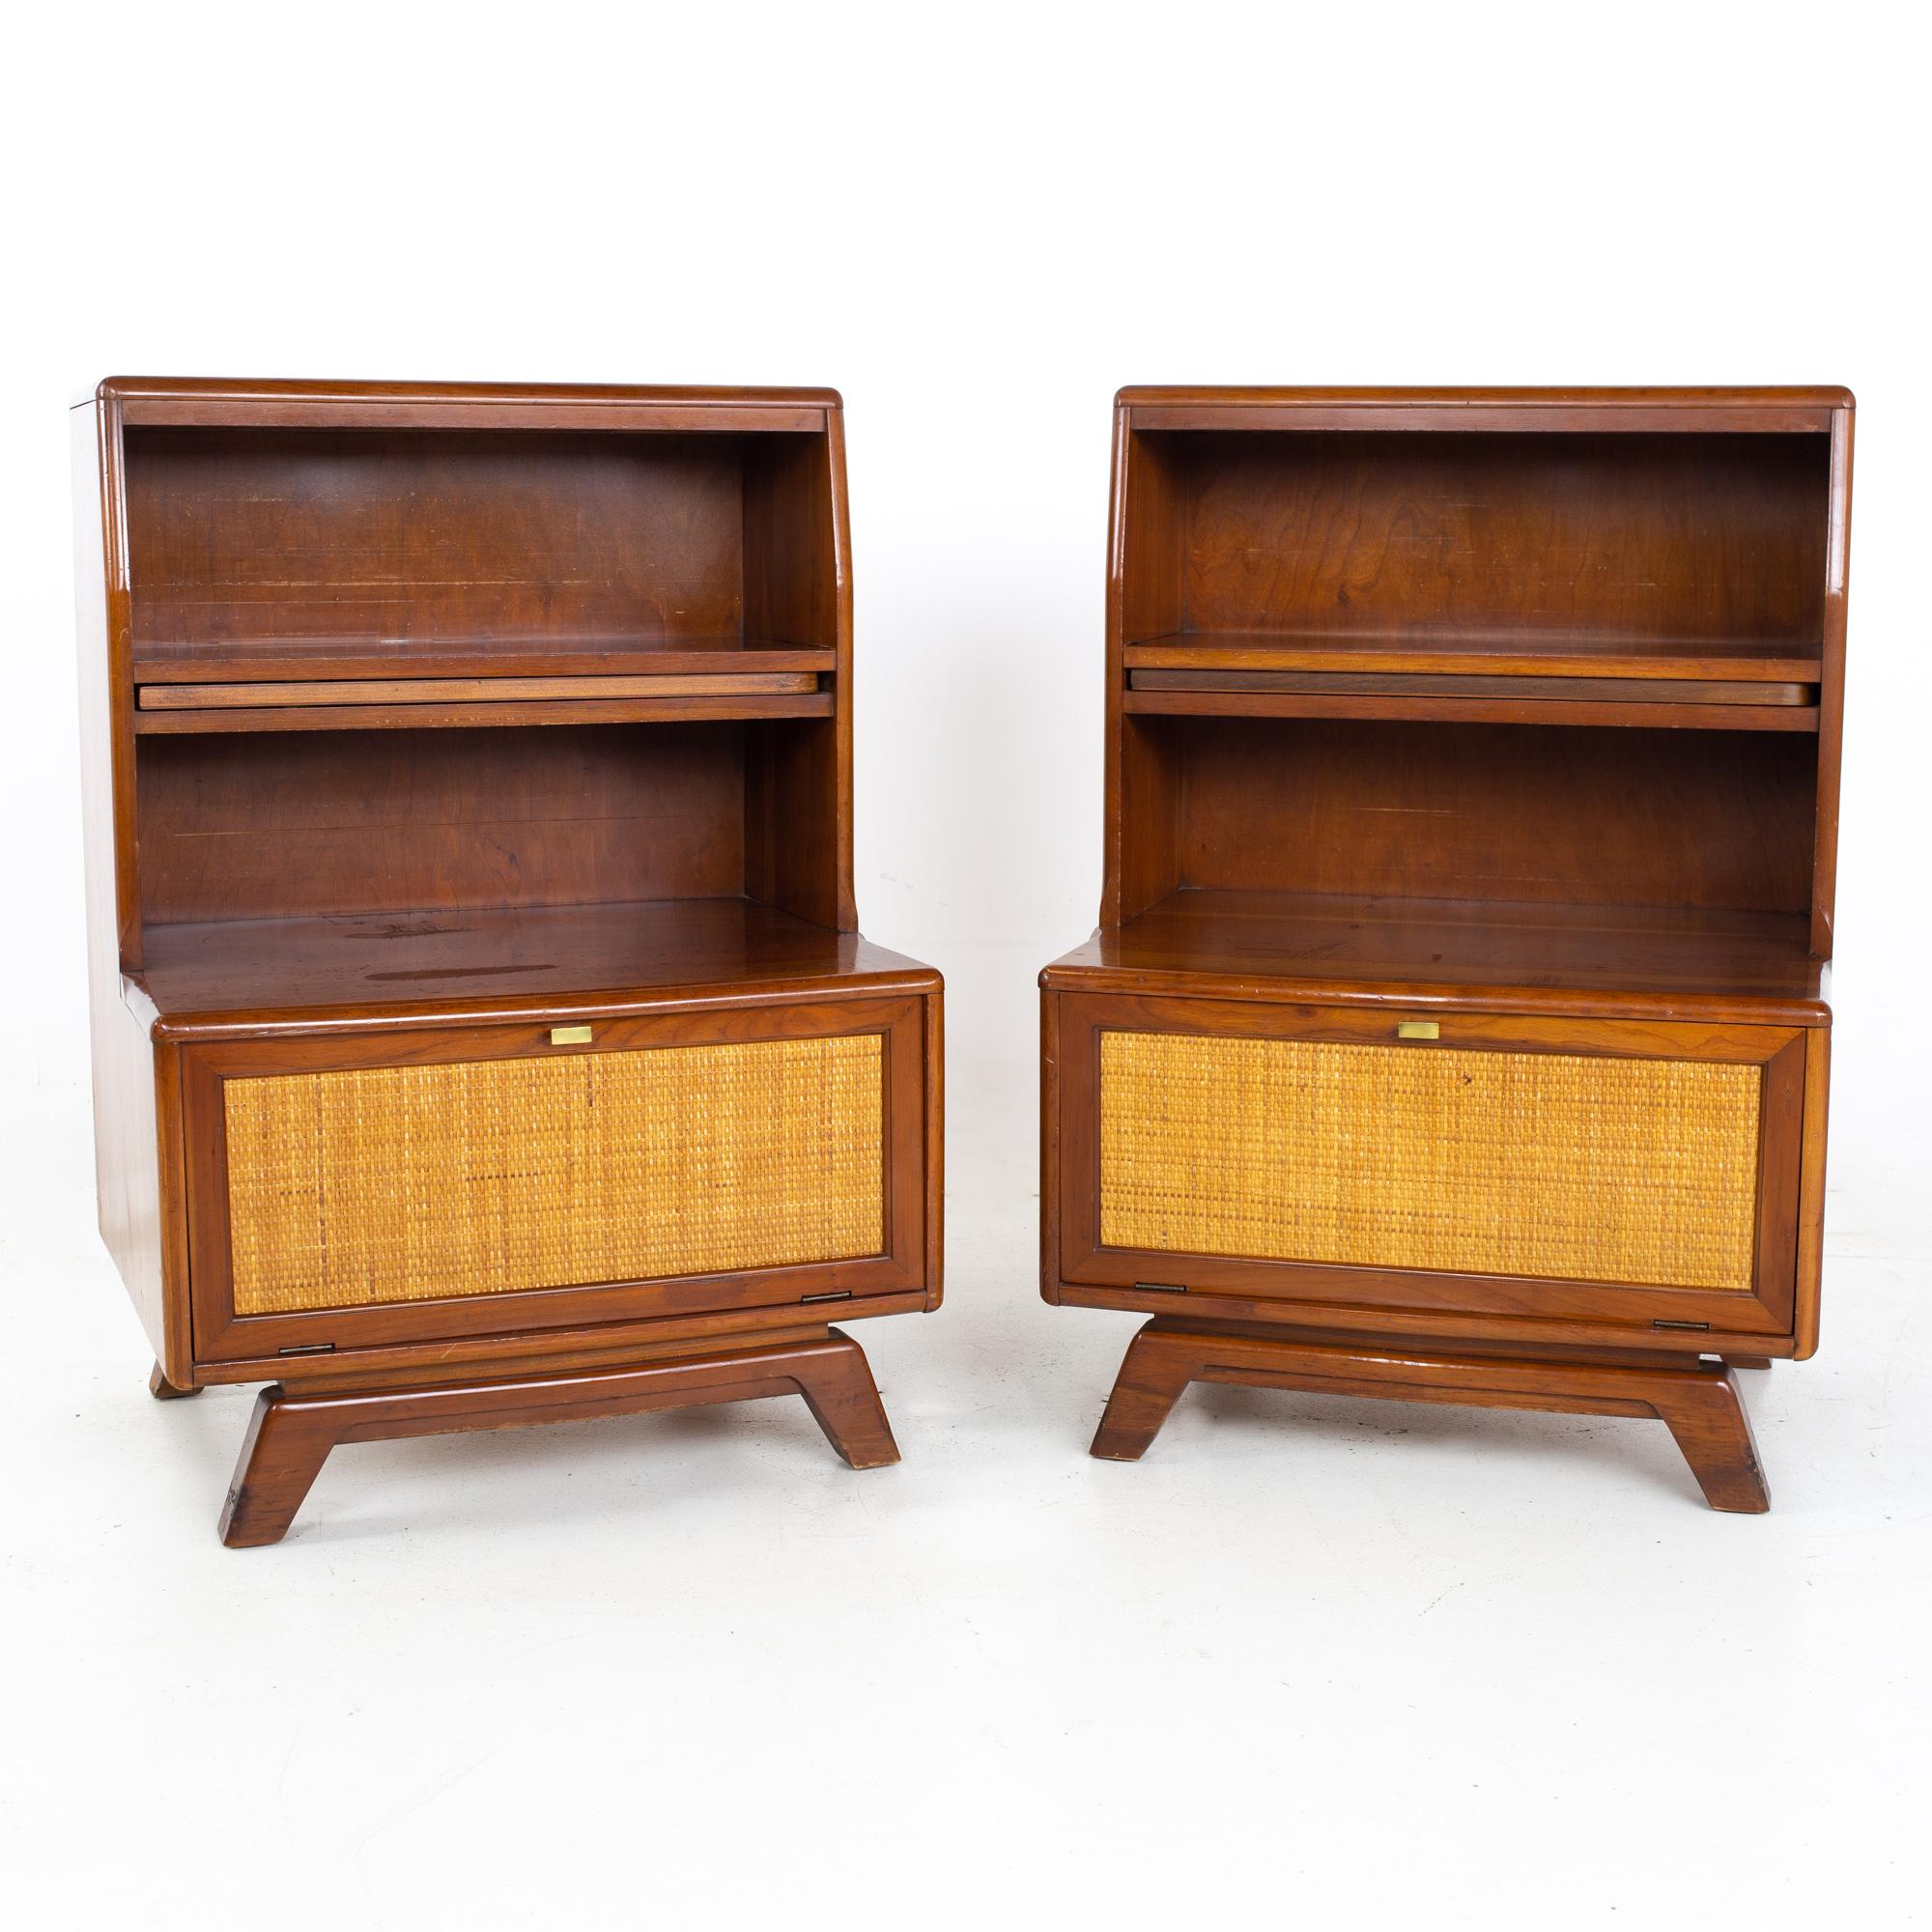 Mid century solid cherry and cane extendable shelf nightstands - a pair
Each nightstand measures: 24 wide x 18.5 deep x 34.5 inches high

All pieces of furniture can be had in what we call restored vintage condition. That means the piece is